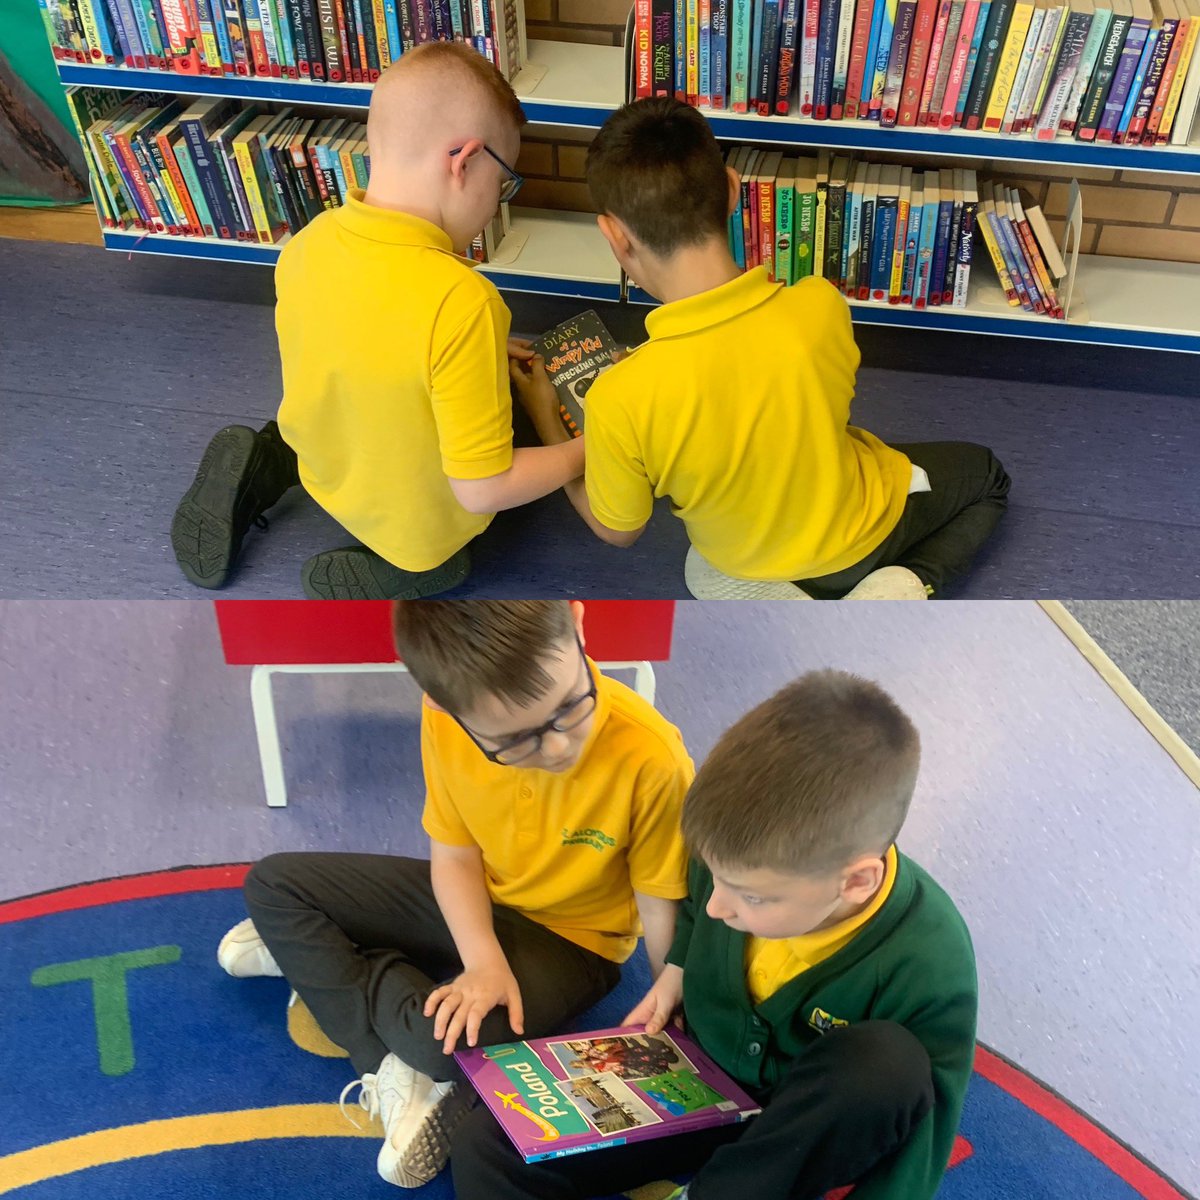 Primary 4/5 enjoyed a visit to our local library today. We loved having the opportunity to explore new books and spend time reading books by our favourite authors.  📖📚@scottishbktrust @LibrariesNL #readingschool